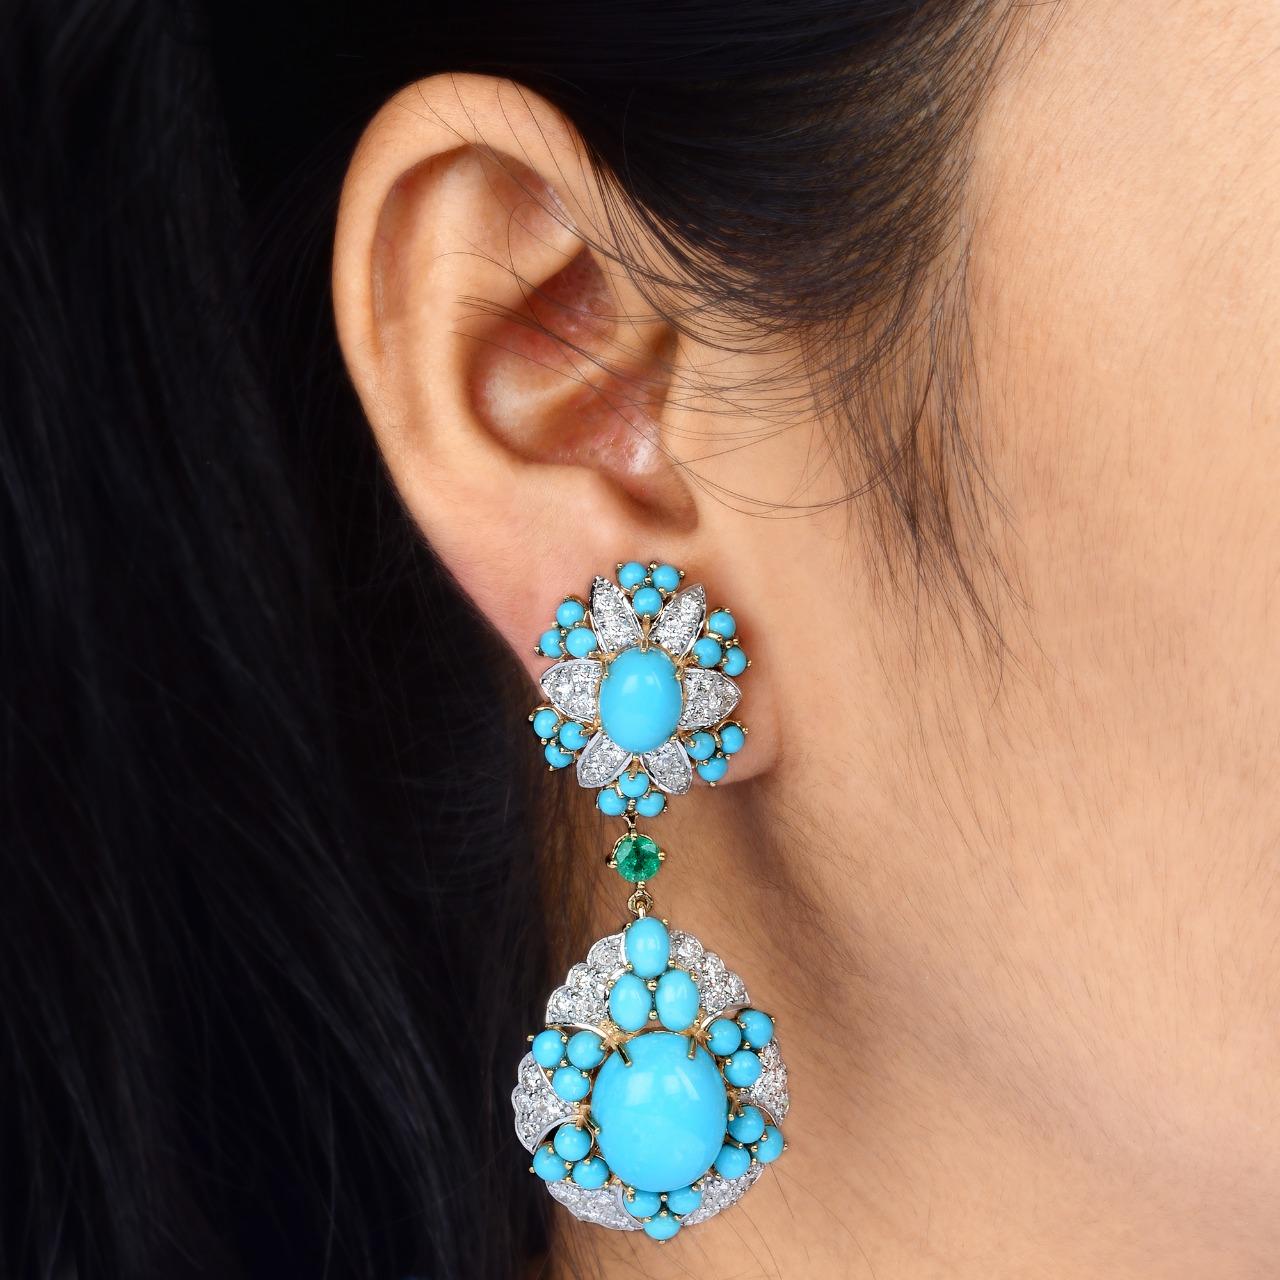 Handcrafted from 14-karat gold, these beautiful earrings are set with 26.02 carats Turquoise, Ruby and 3.60 carats of glimmering diamonds.

FOLLOW  MEGHNA JEWELS storefront to view the latest collection & exclusive pieces.  Meghna Jewels is proudly